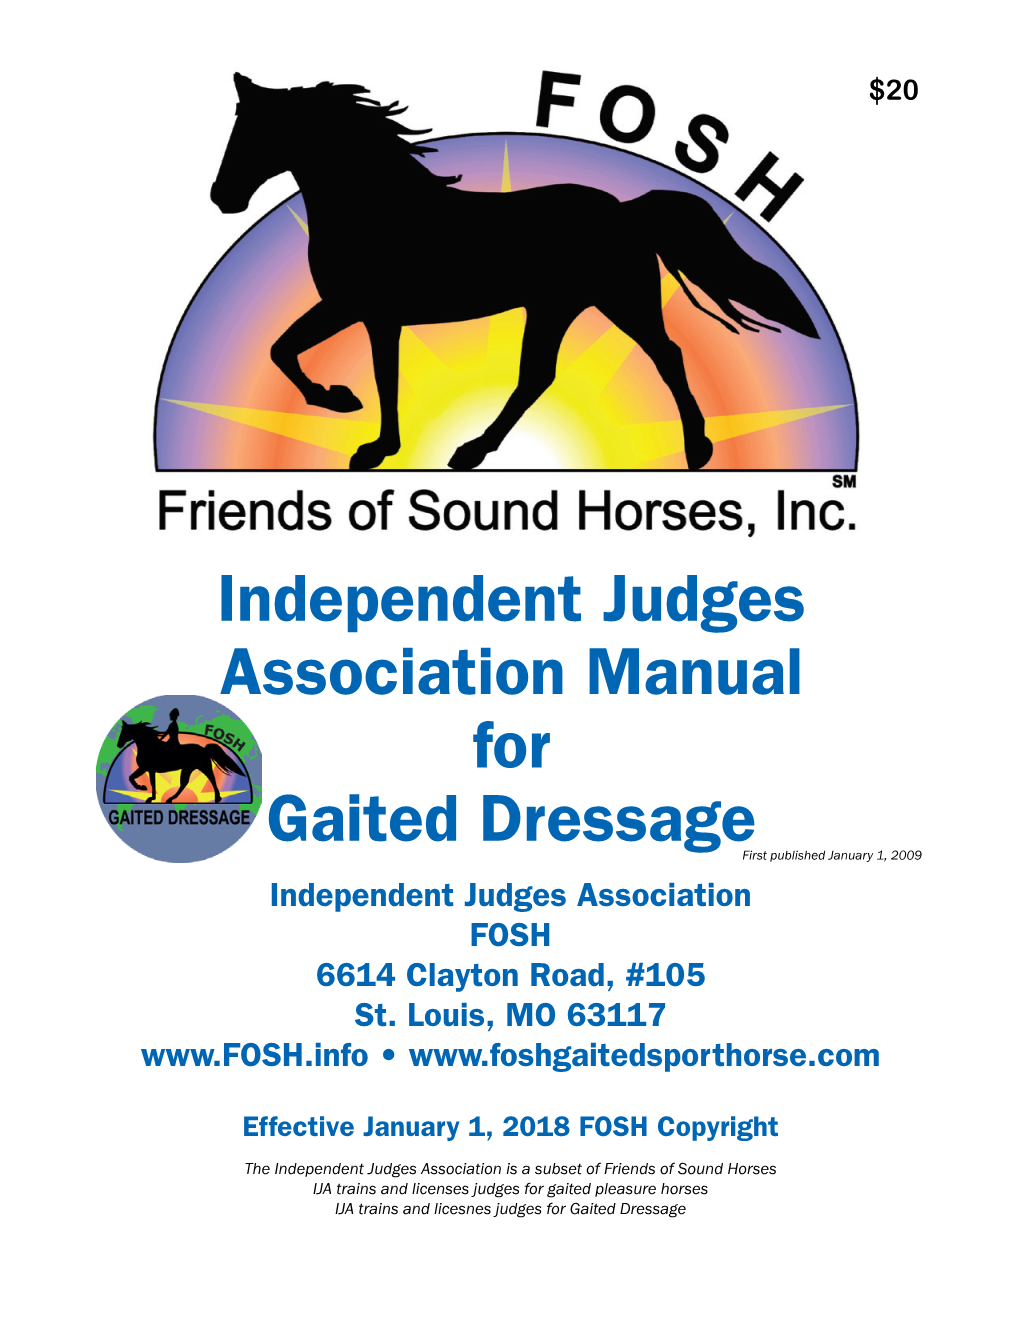 Manual for Gaited Dressage First Published January 1, 2009 Independent Judges Association FOSH 6614 Clayton Road, #105 St